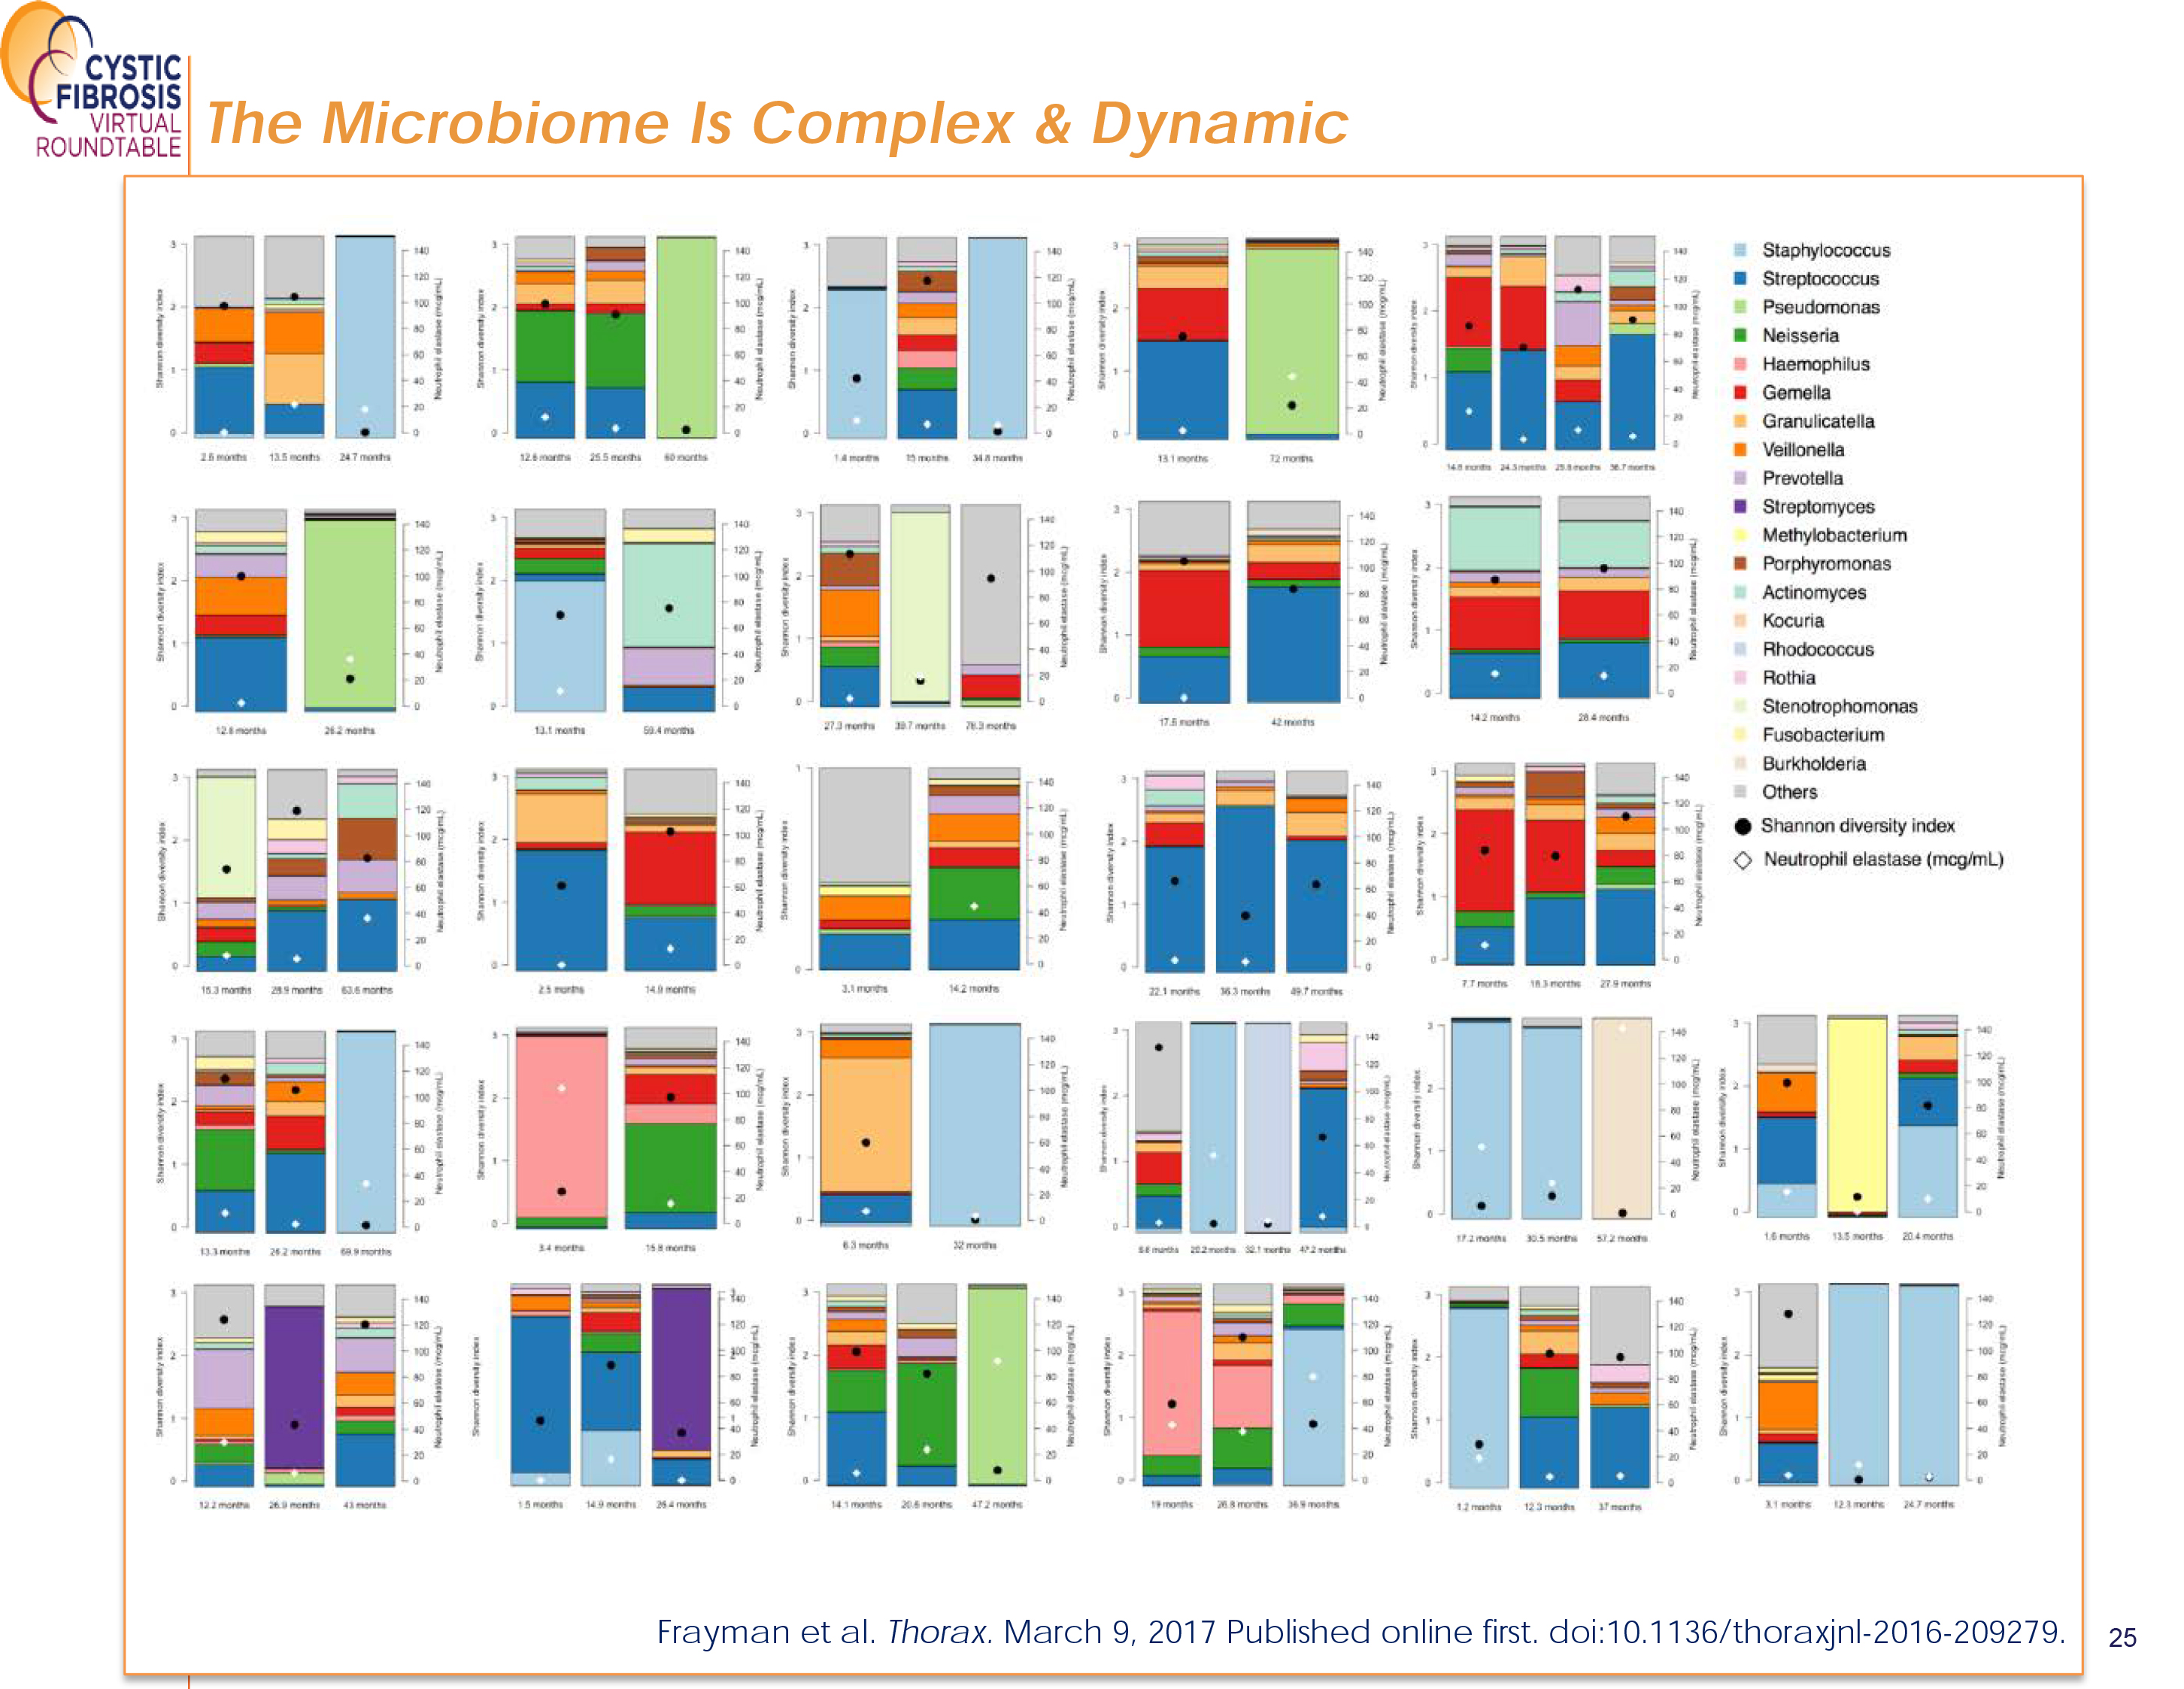  The Microbiome is Complex and Dynamic